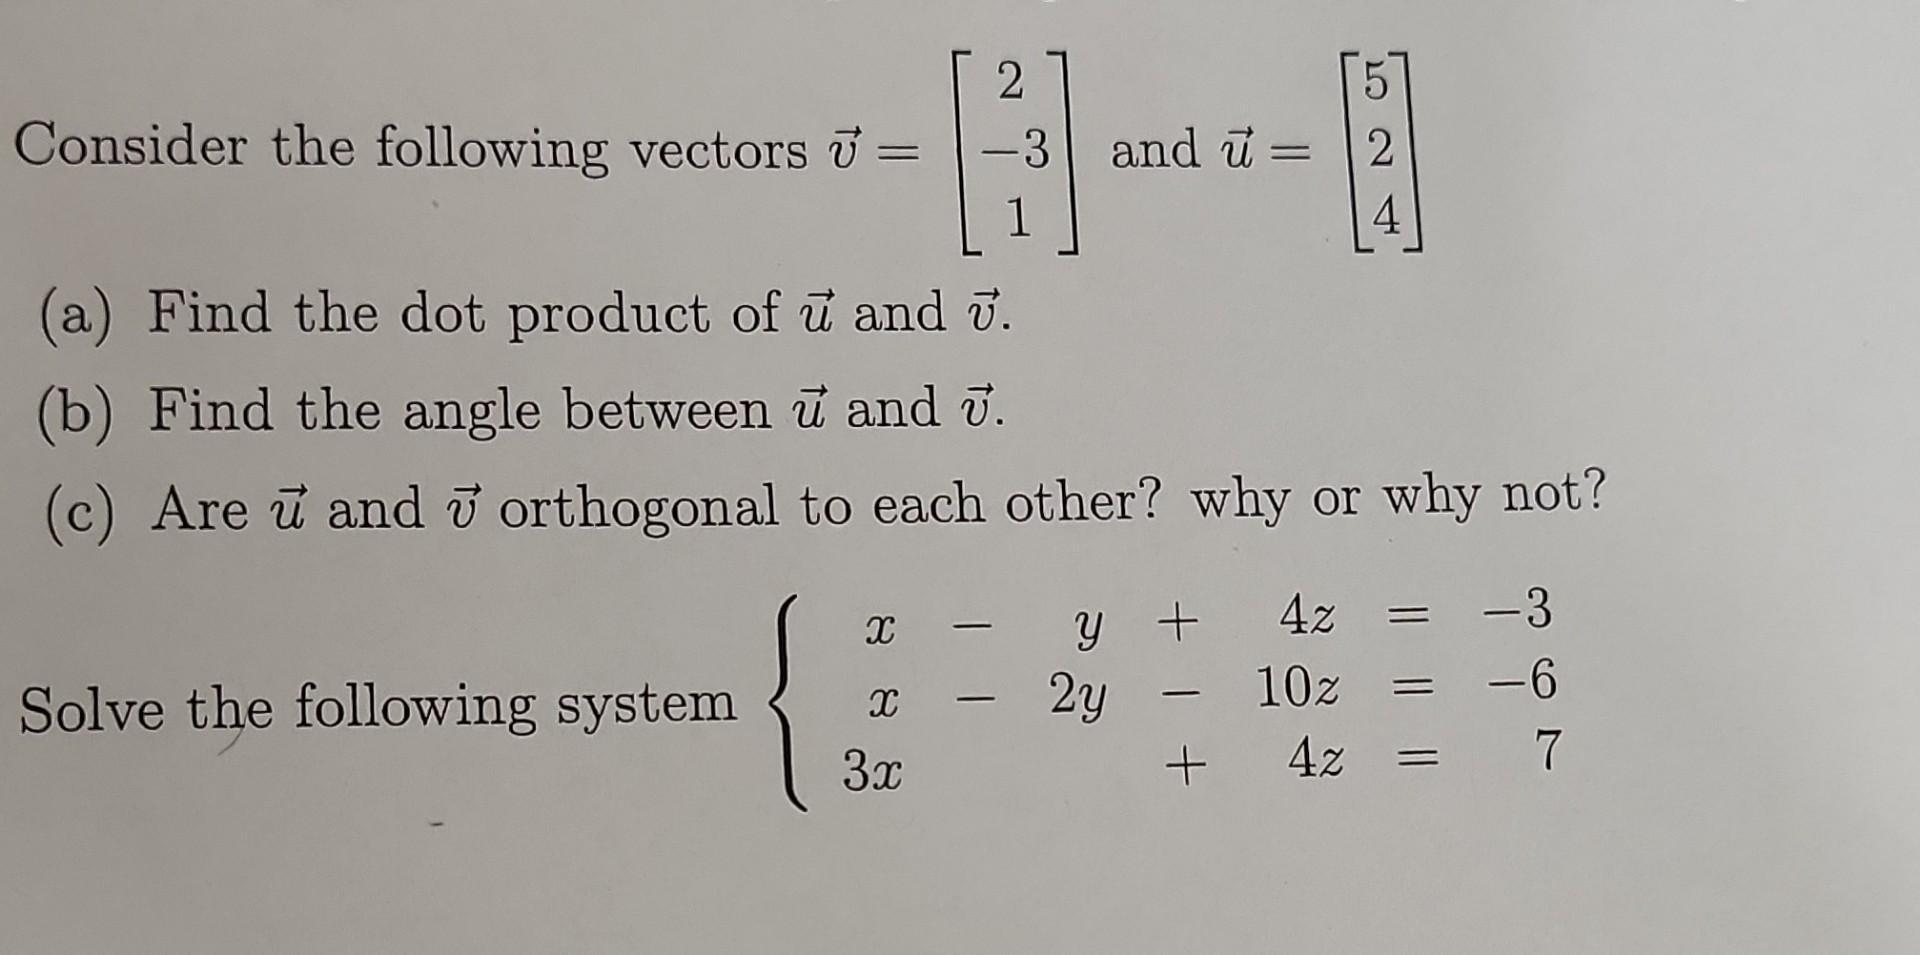 2 Consider the following vectors = -3 Solve the following system X (a) Find the dot product of u and 7. (b)